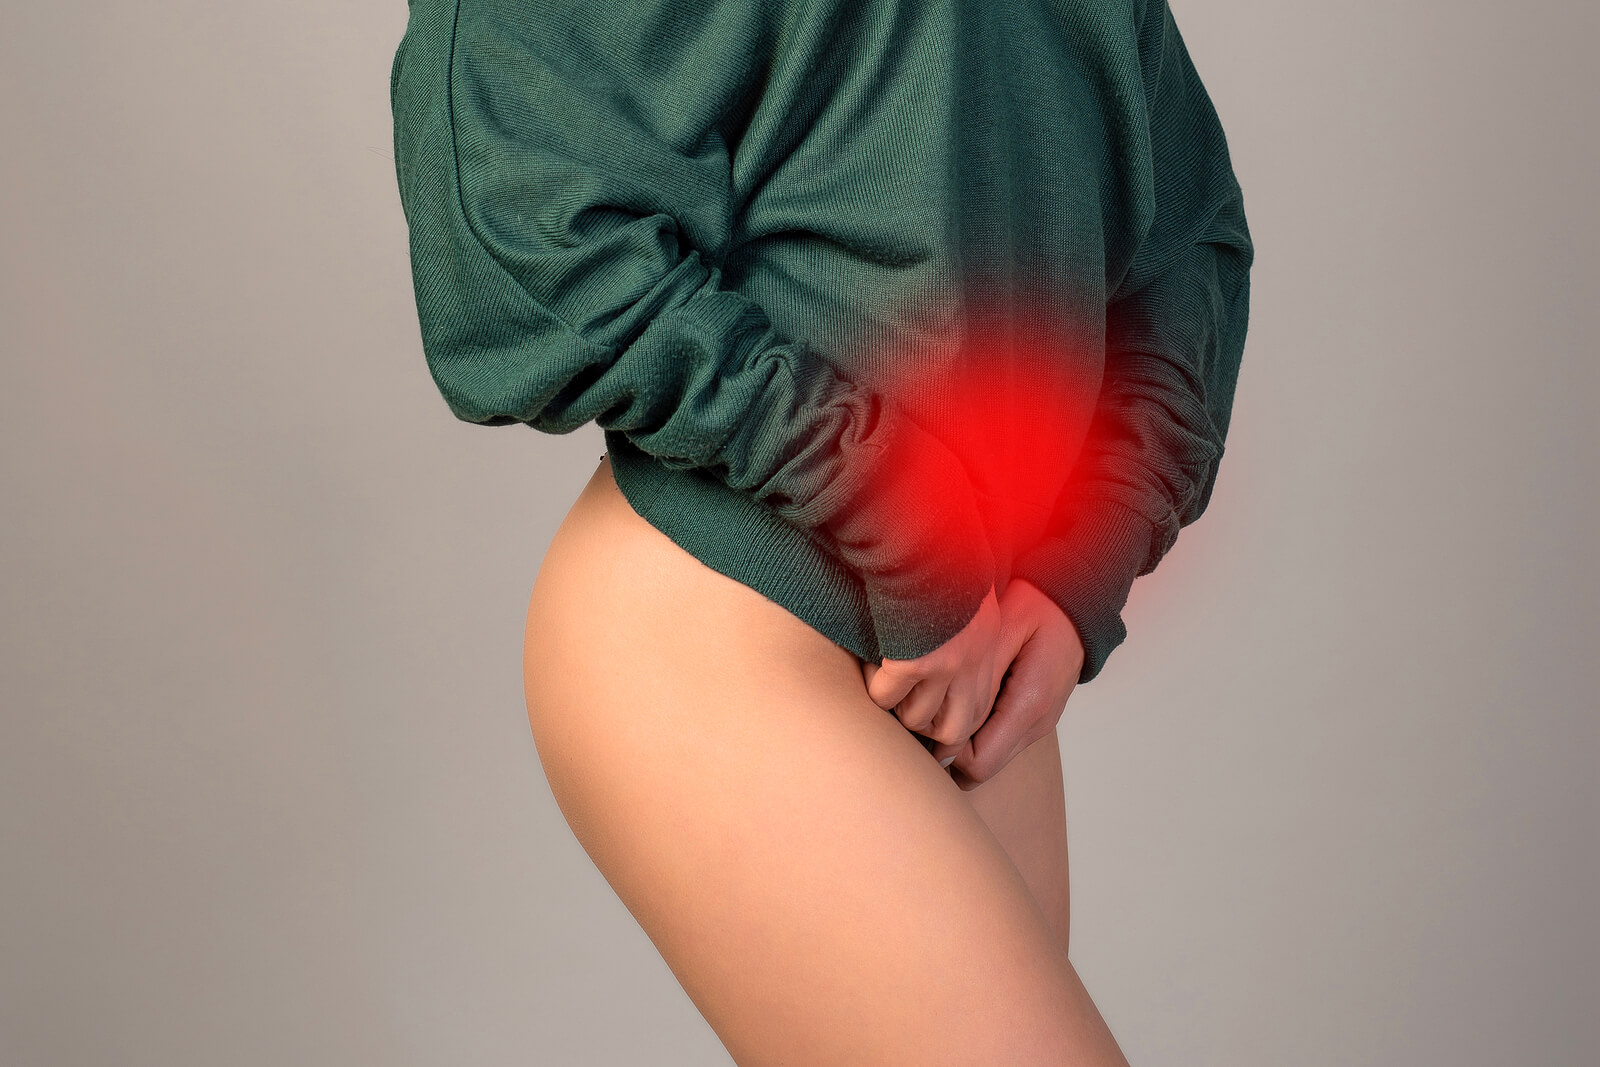 Woman with her hands covering her pelvic area with her hands as she deals with the symptoms of endometriosis. Pelvic Floor Physical Therapy for Endometriosis can help you manage your pain and discomfort.